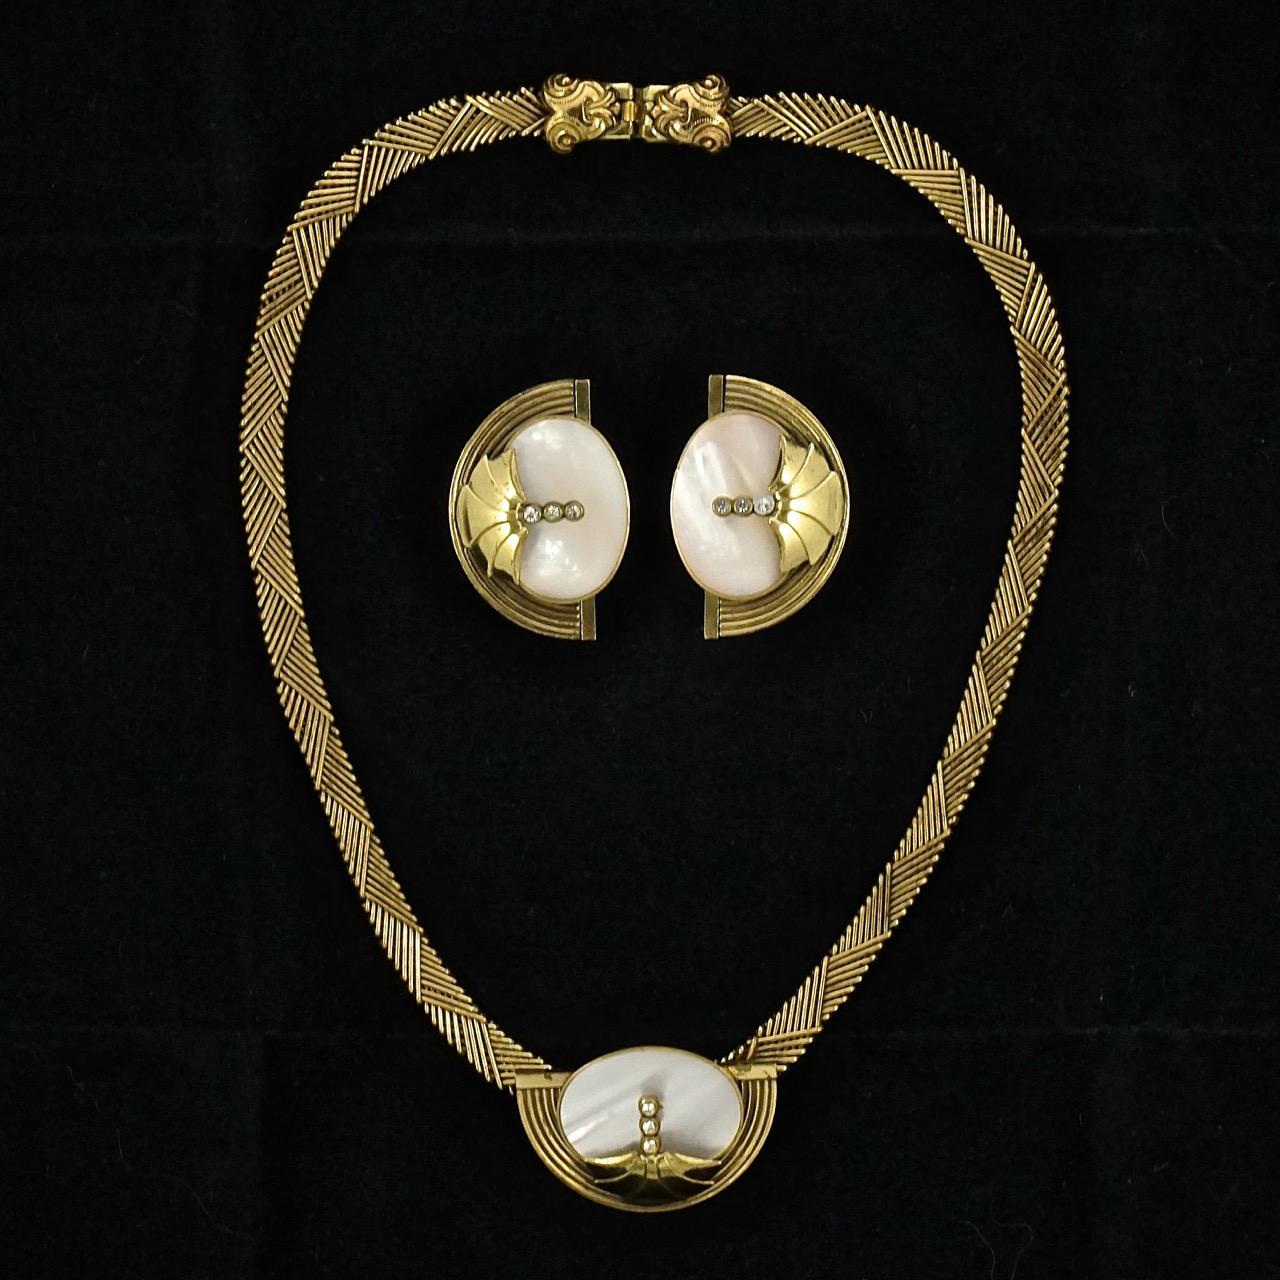 Ermani Bulatti Gold Plated Mother of Pearl Crystal Necklace and Earrings Set For Sale 6